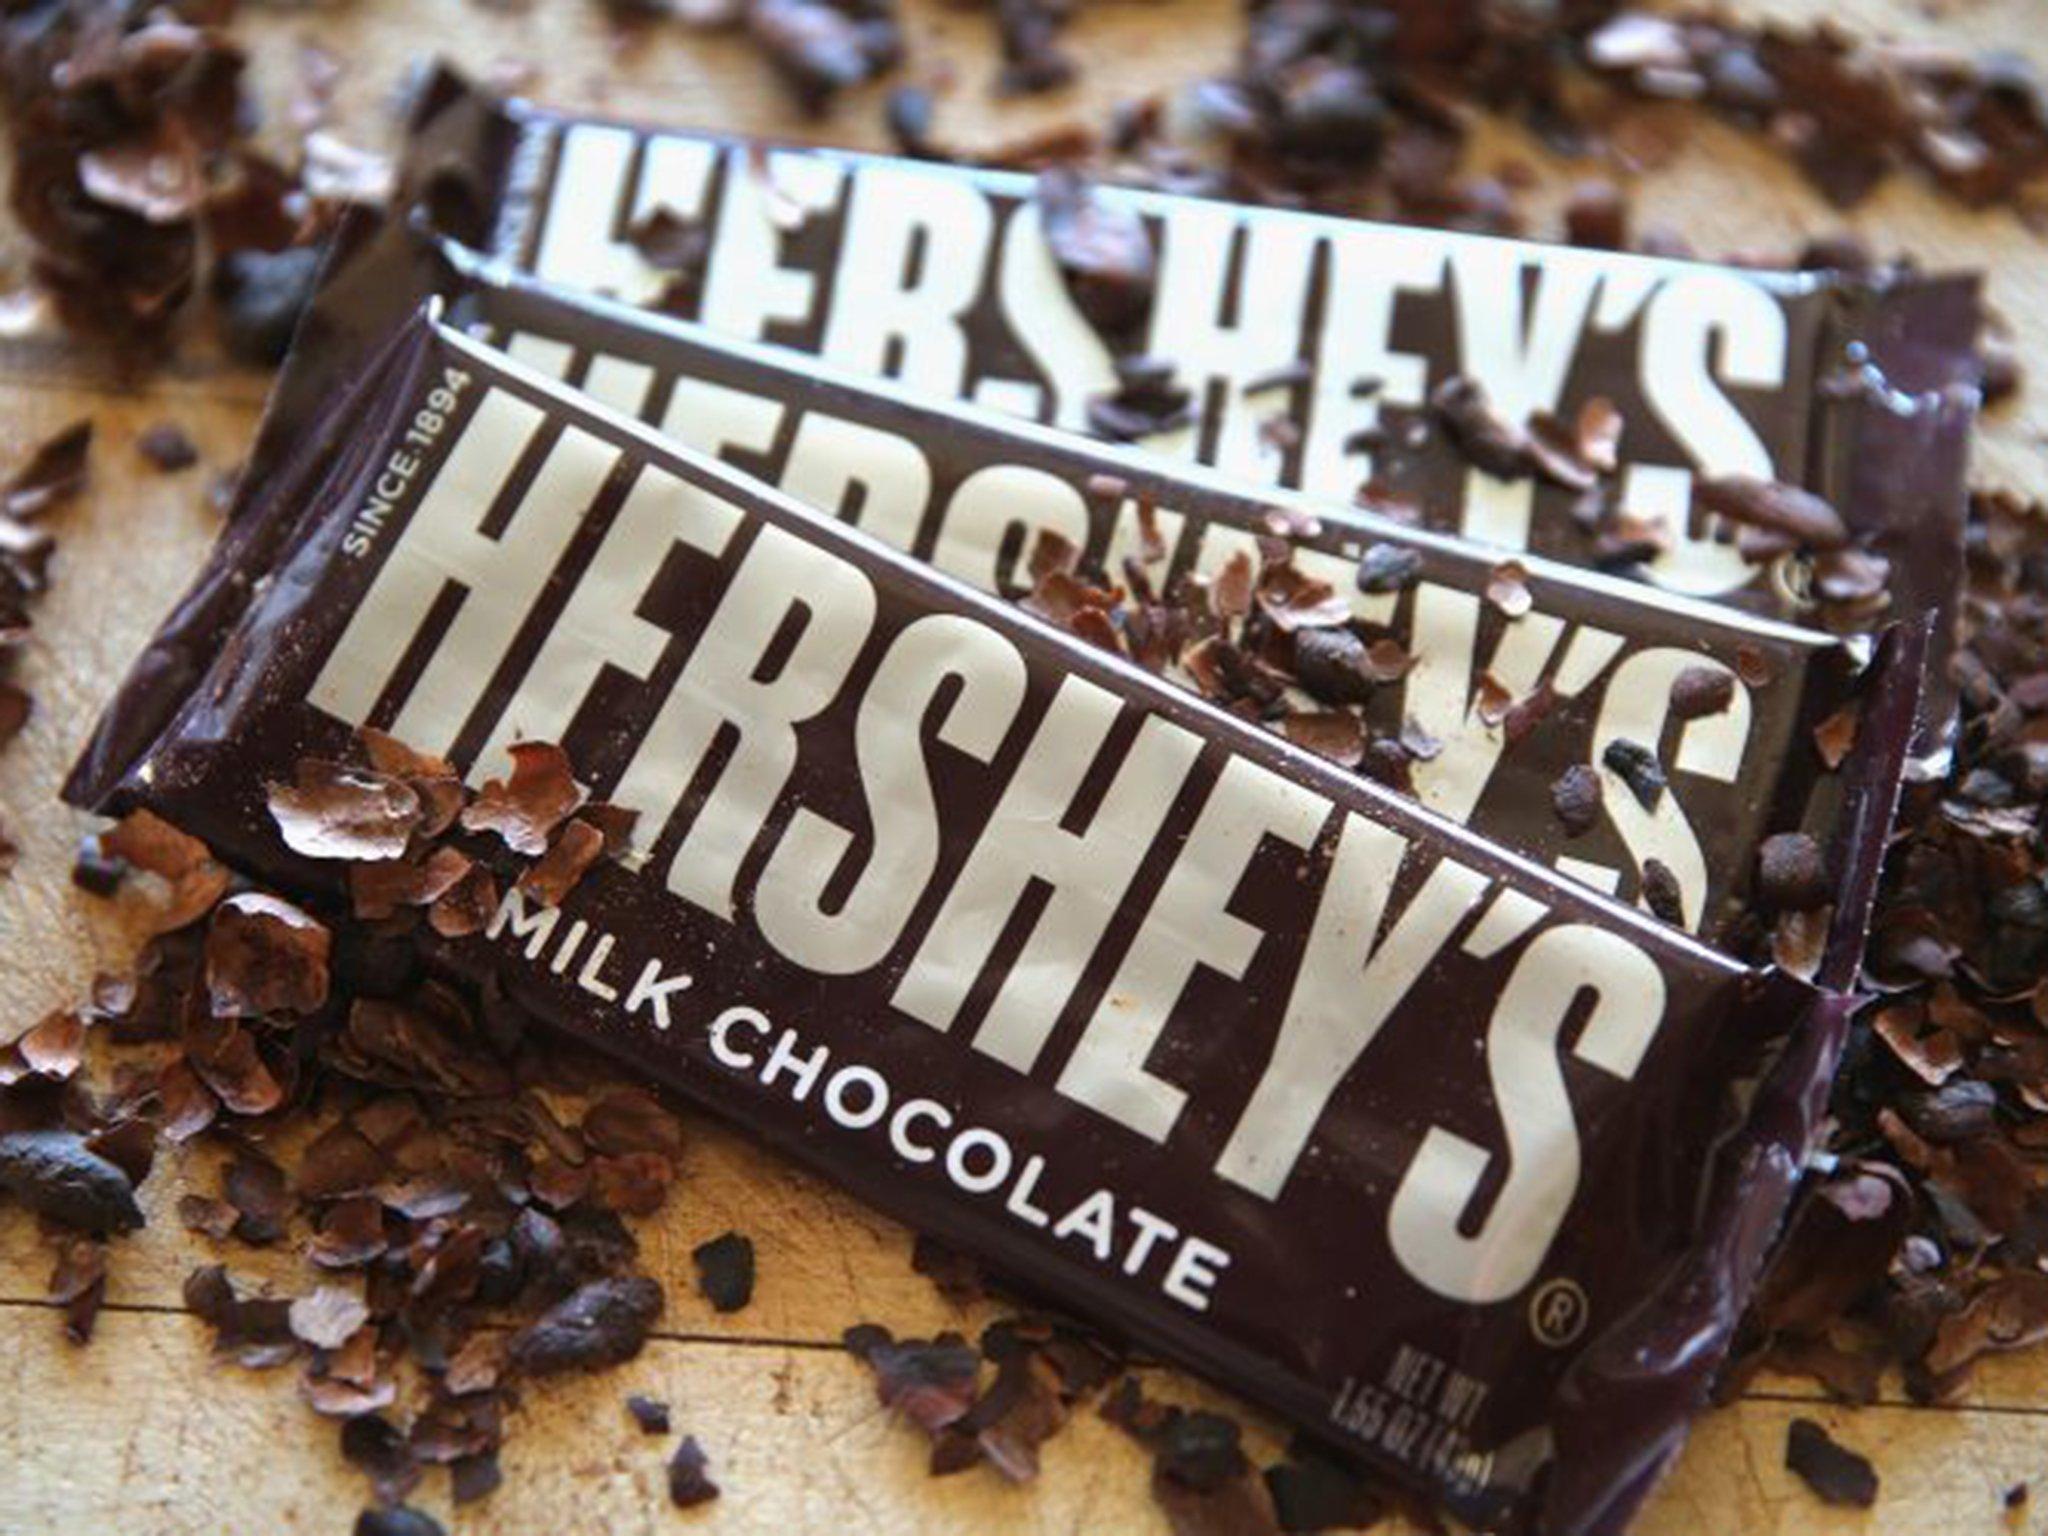 Hershey's angers US chocolate purists by forcing company to stop